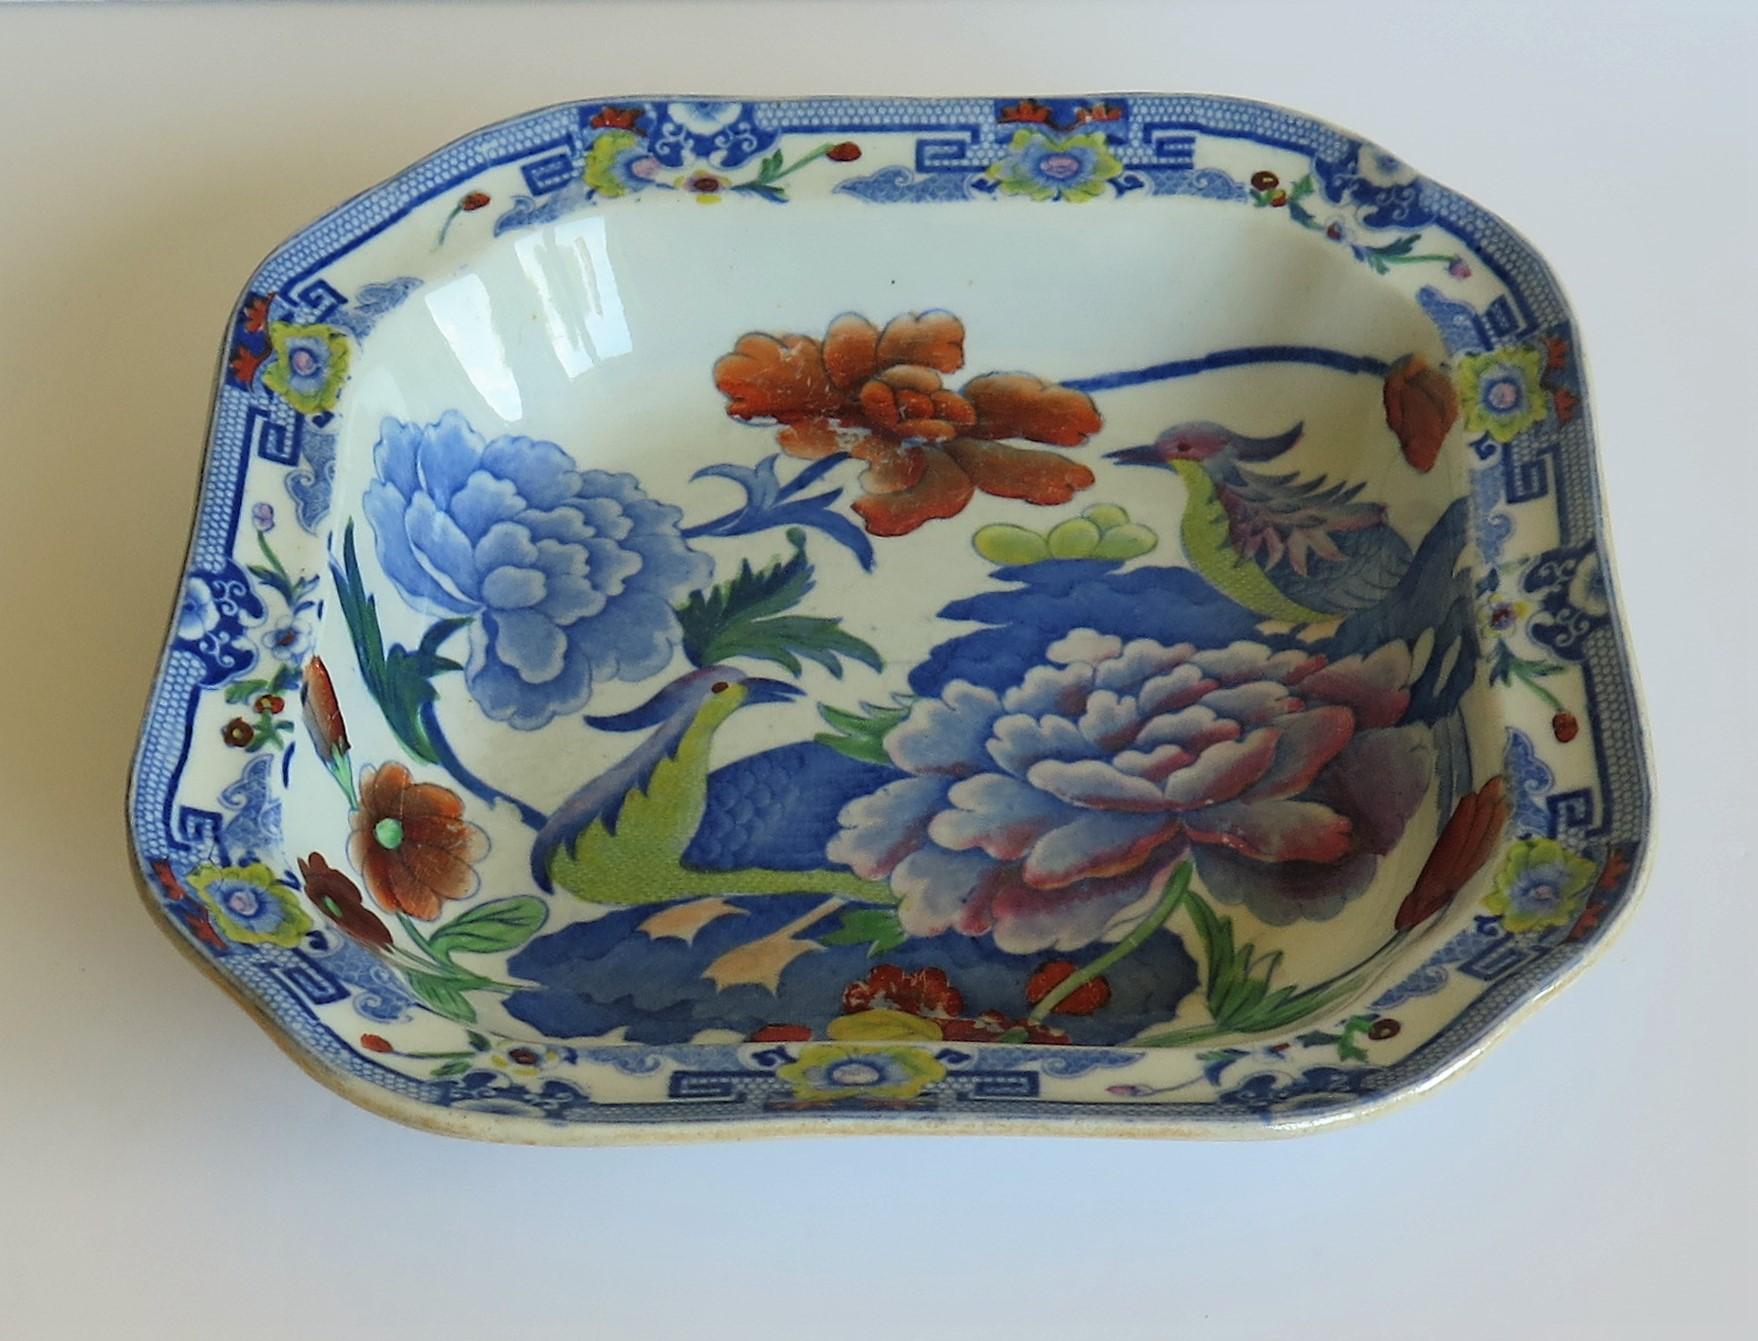 This is a very good large bowl or dish made by Mason's Ironstone, England in the early 19th century, circa 1815-1820.

Early Mason's bowls of this size and shape tend to be rare.

The bowl is nominally square with an everted rim and canted corners.